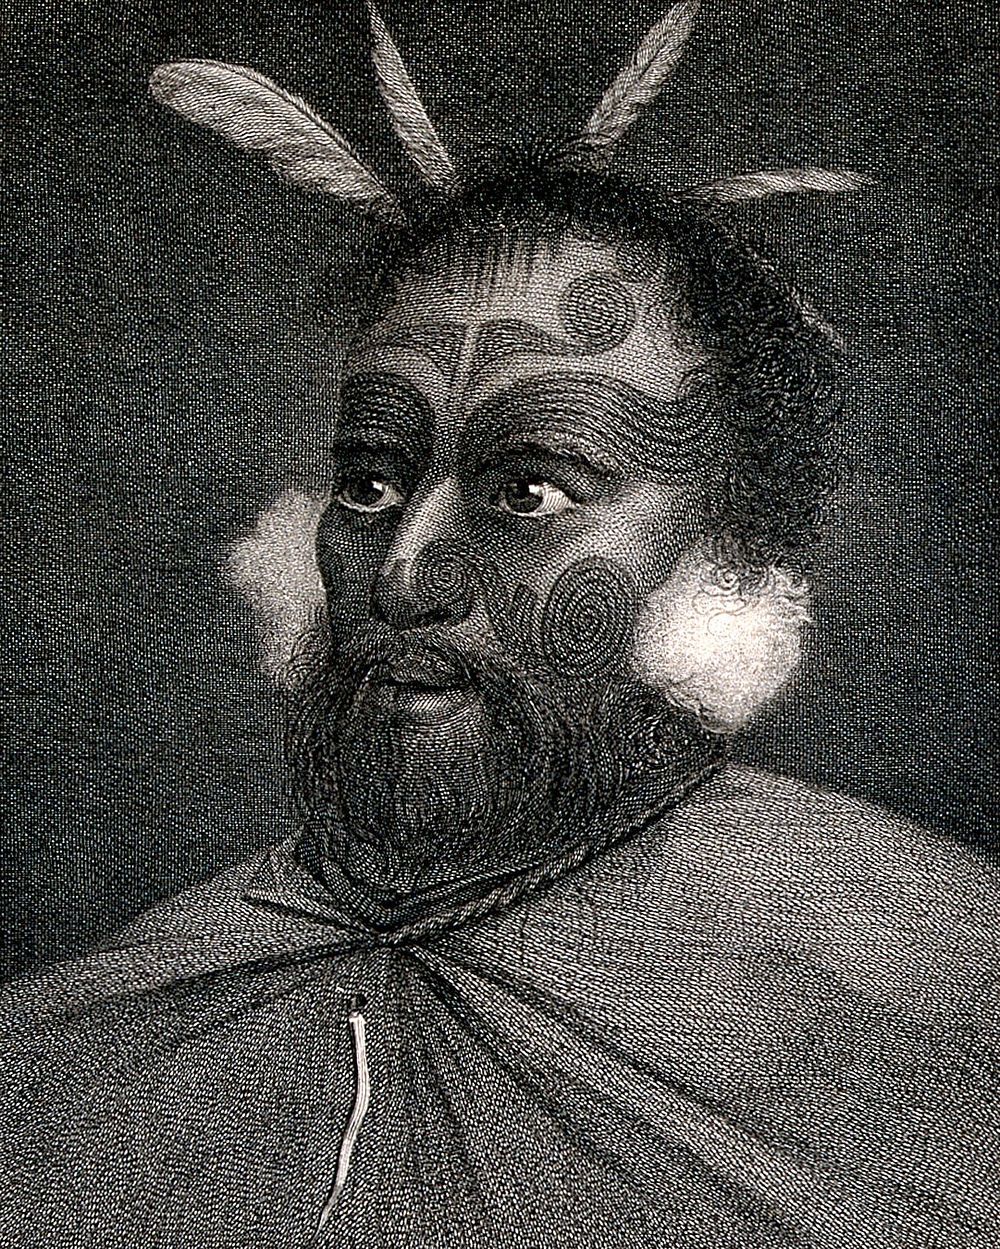 A Maori man with tattoos on his face, encountered by Captain Cook on his second voyage, 1772-1775. Engraving by Michel…